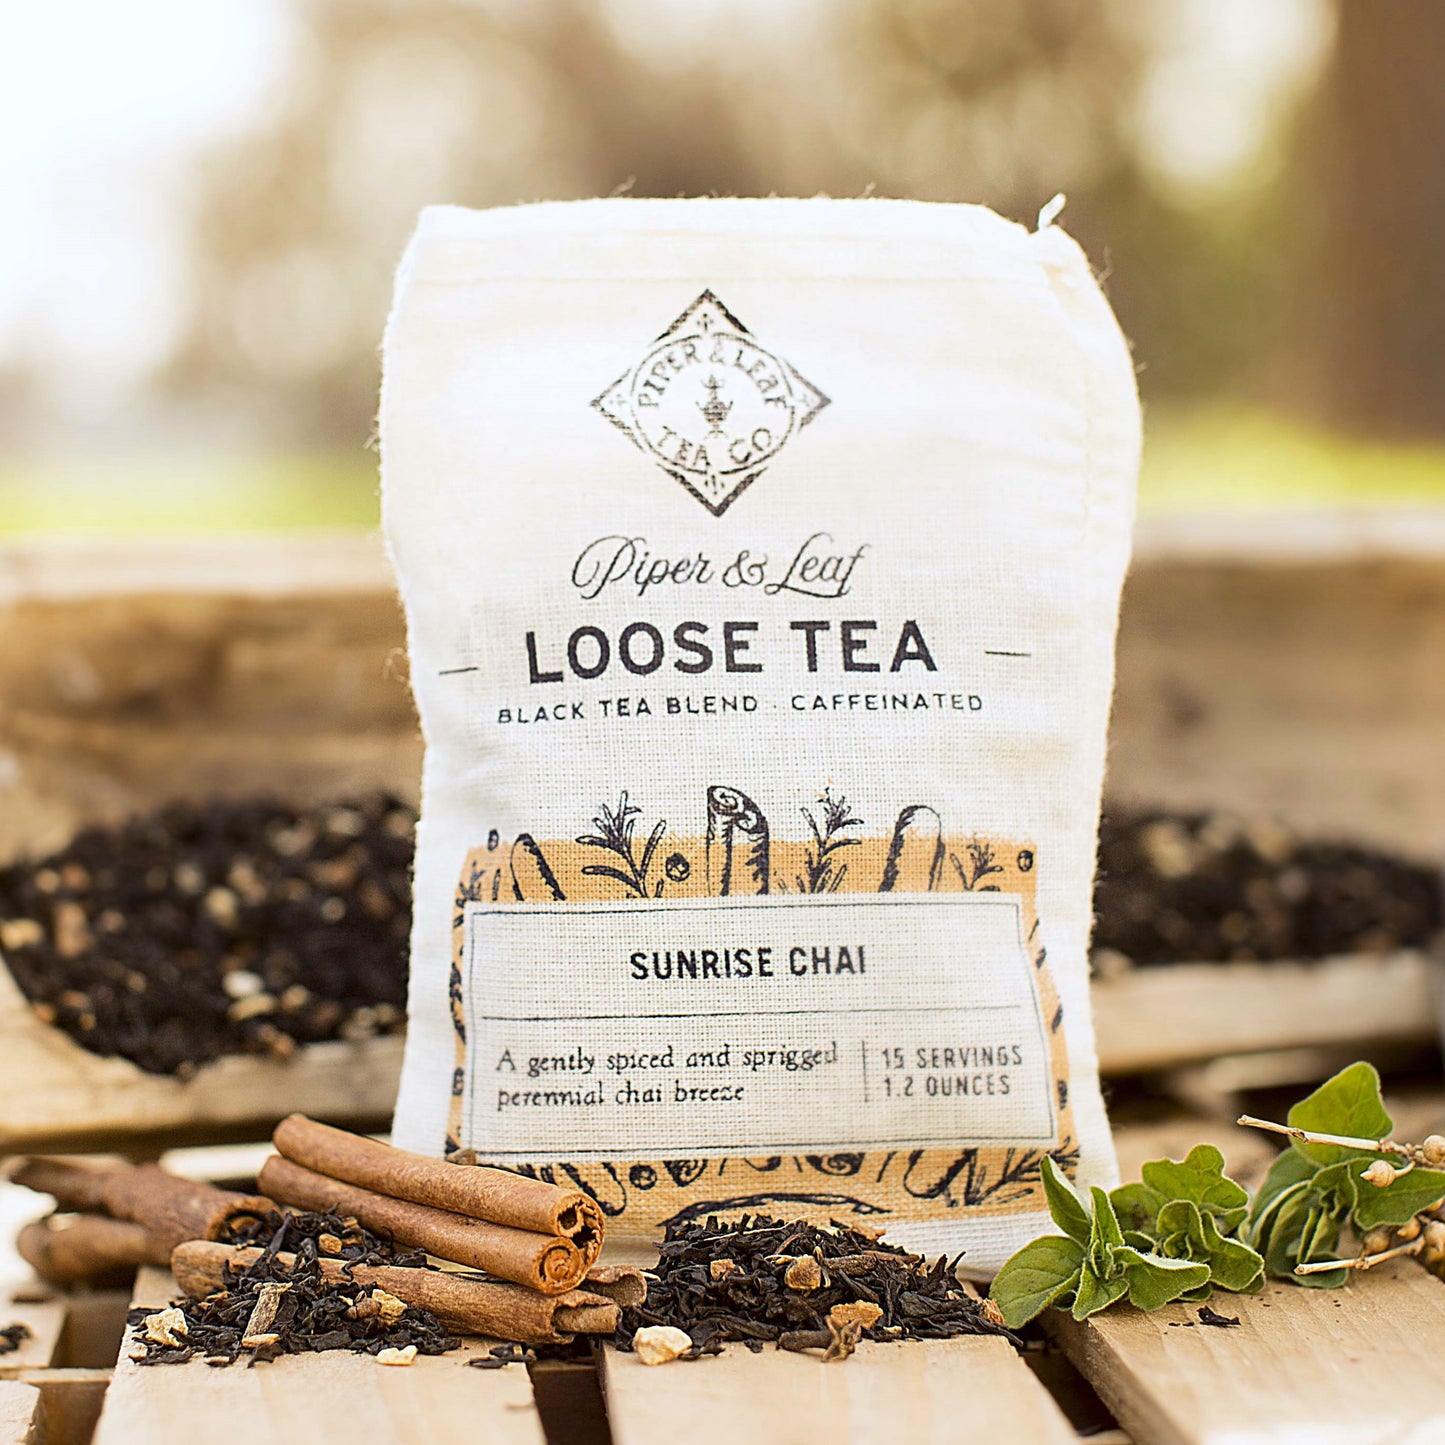 A Sunrise Chai Muslin Bag of Loose Leaf Tea - 15 Servings by Piper & Leaf Tea Co. sitting on a wooden table.